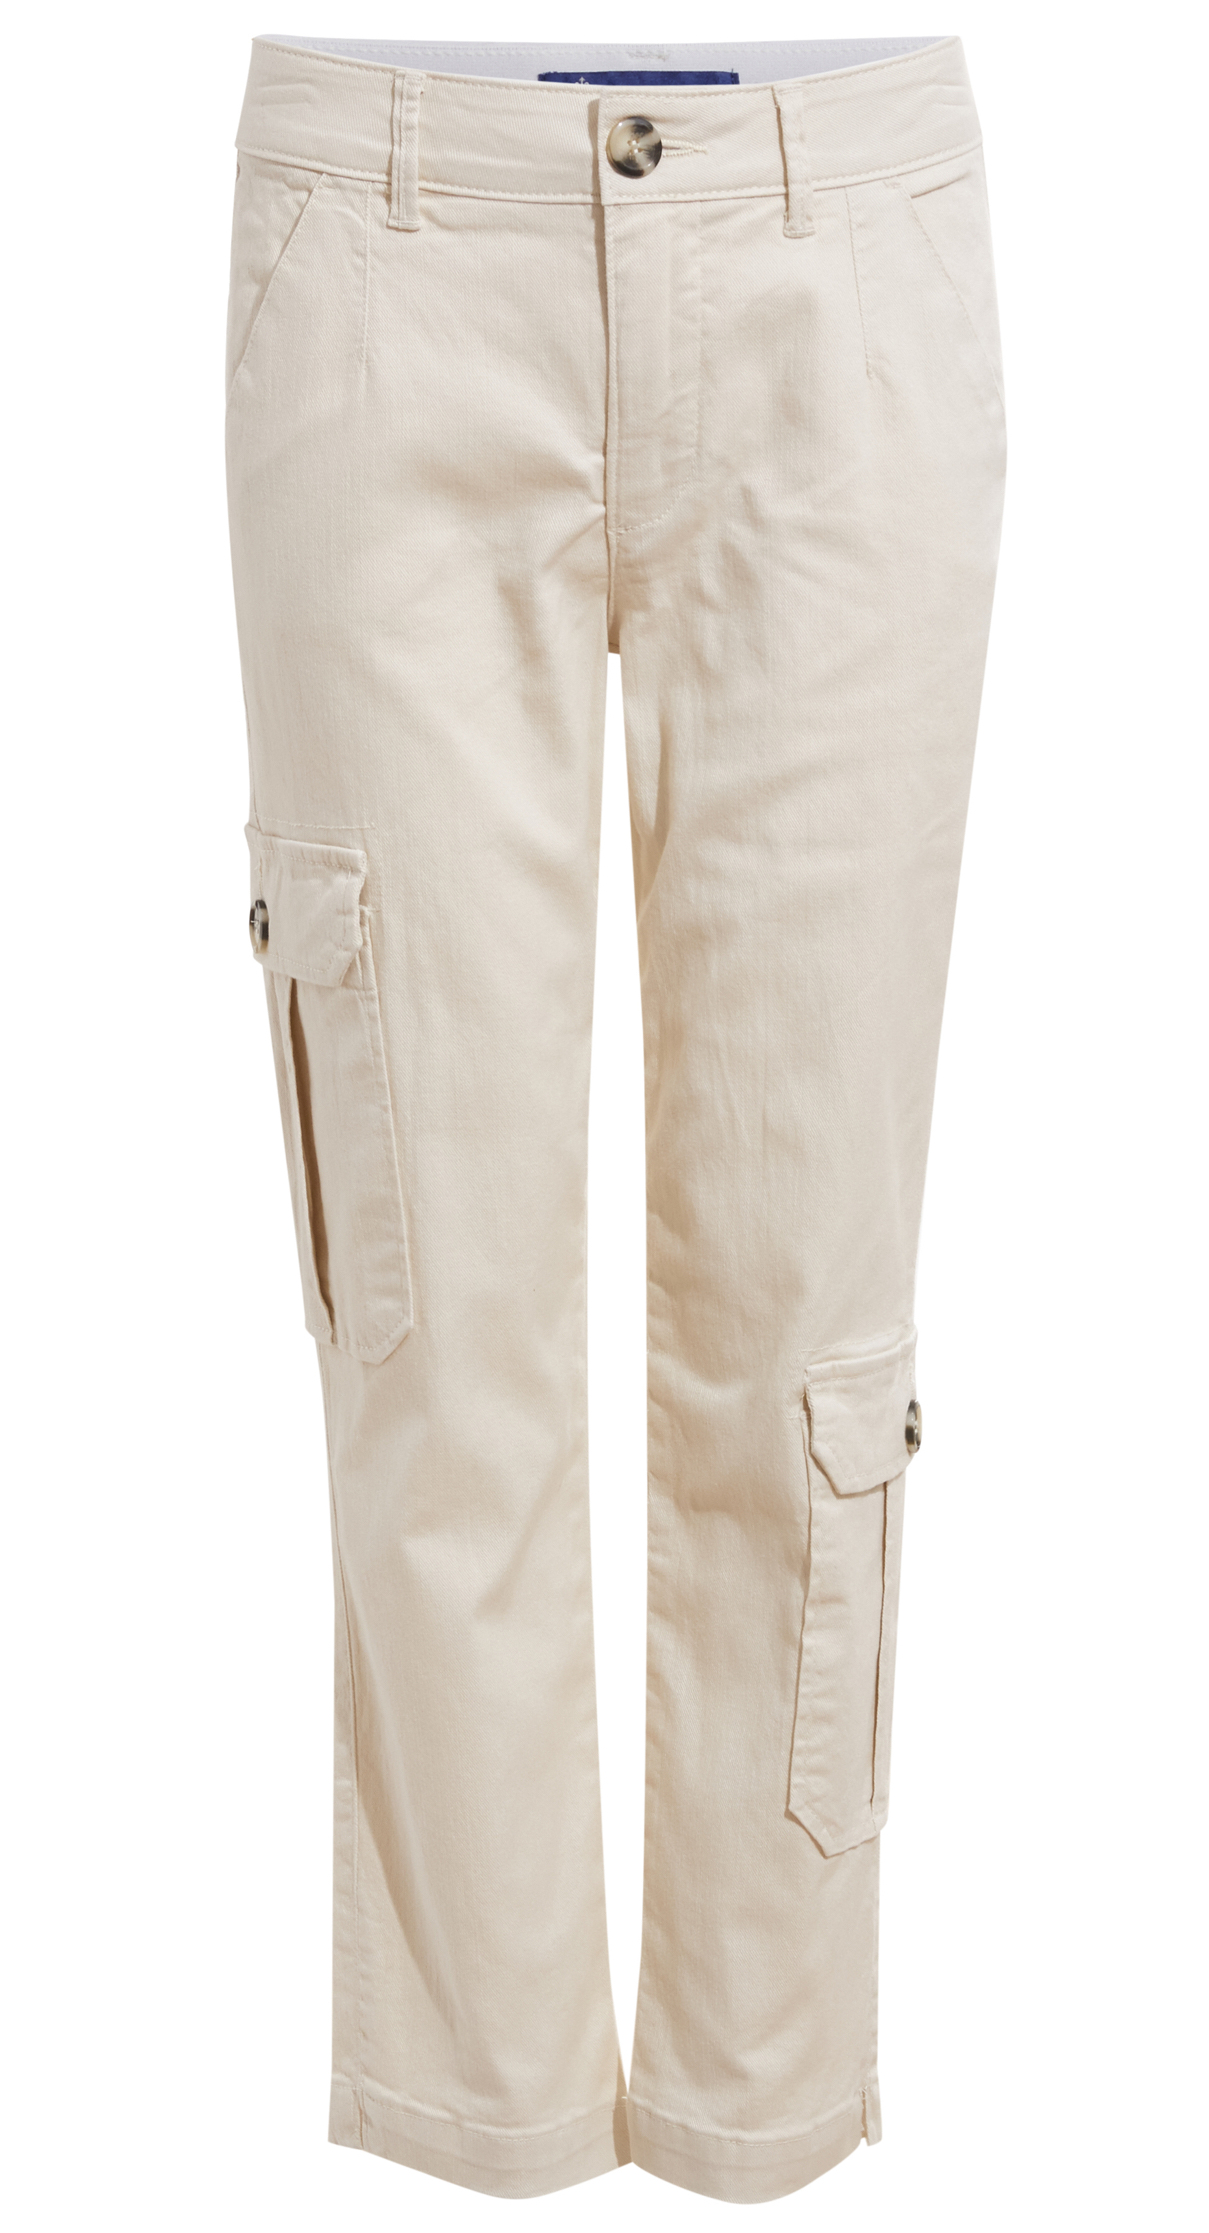 Democracy High Rise Trouser with Patch Pockets